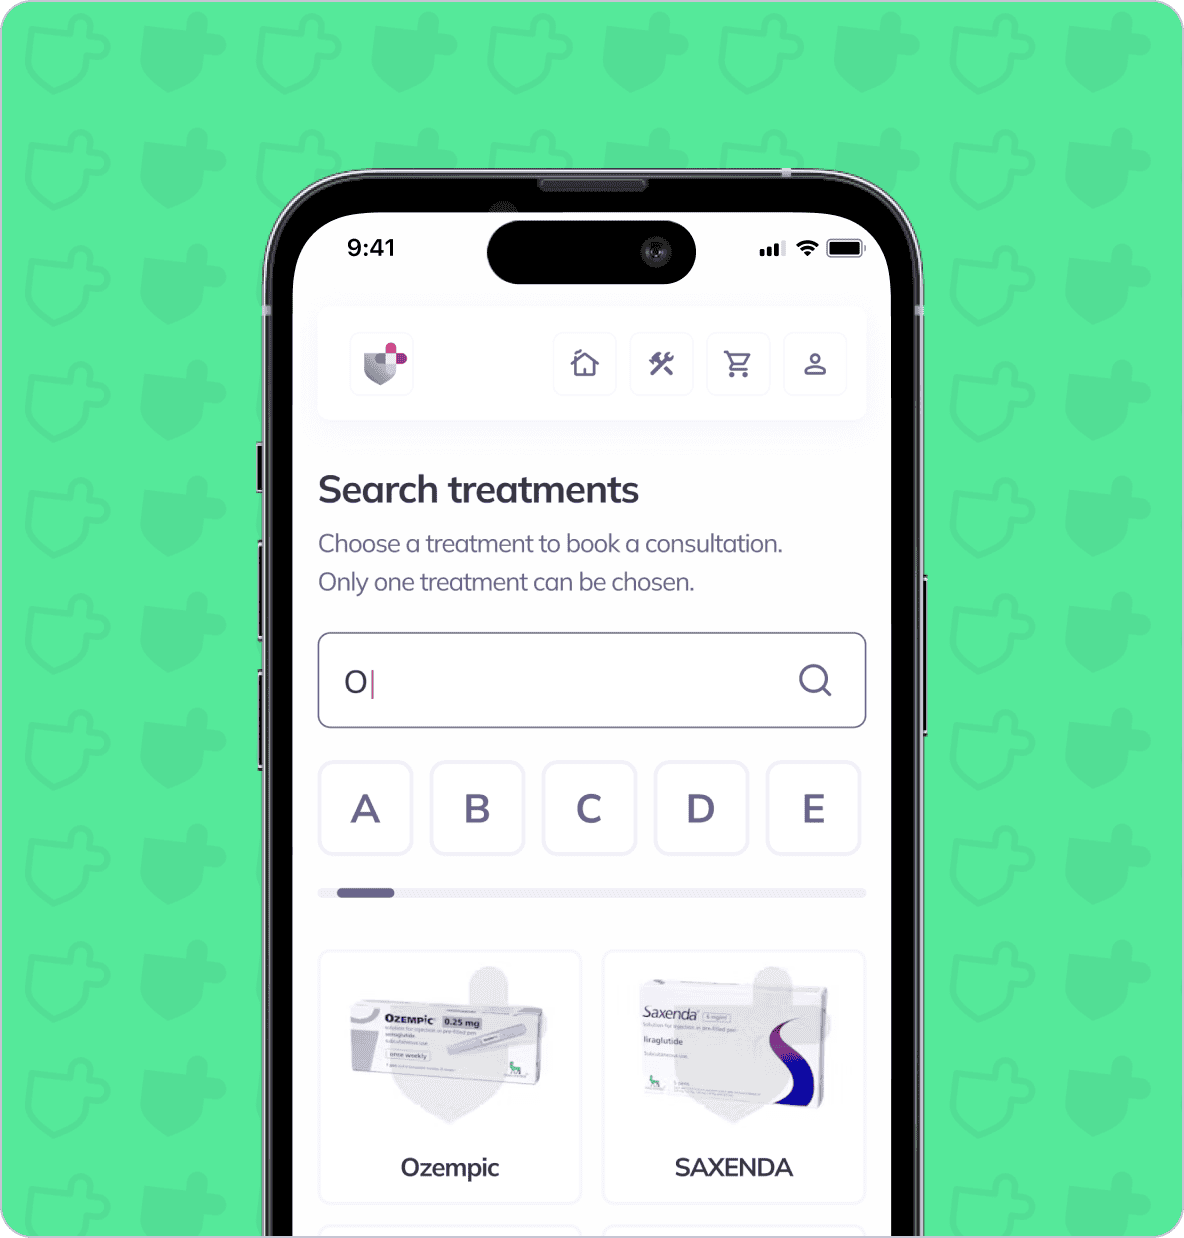 A smartphone screen shows a medical app with options to search for treatments. The user is typing into the search bar. Ozempic and Saxenda are displayed as treatment options below the search bar.